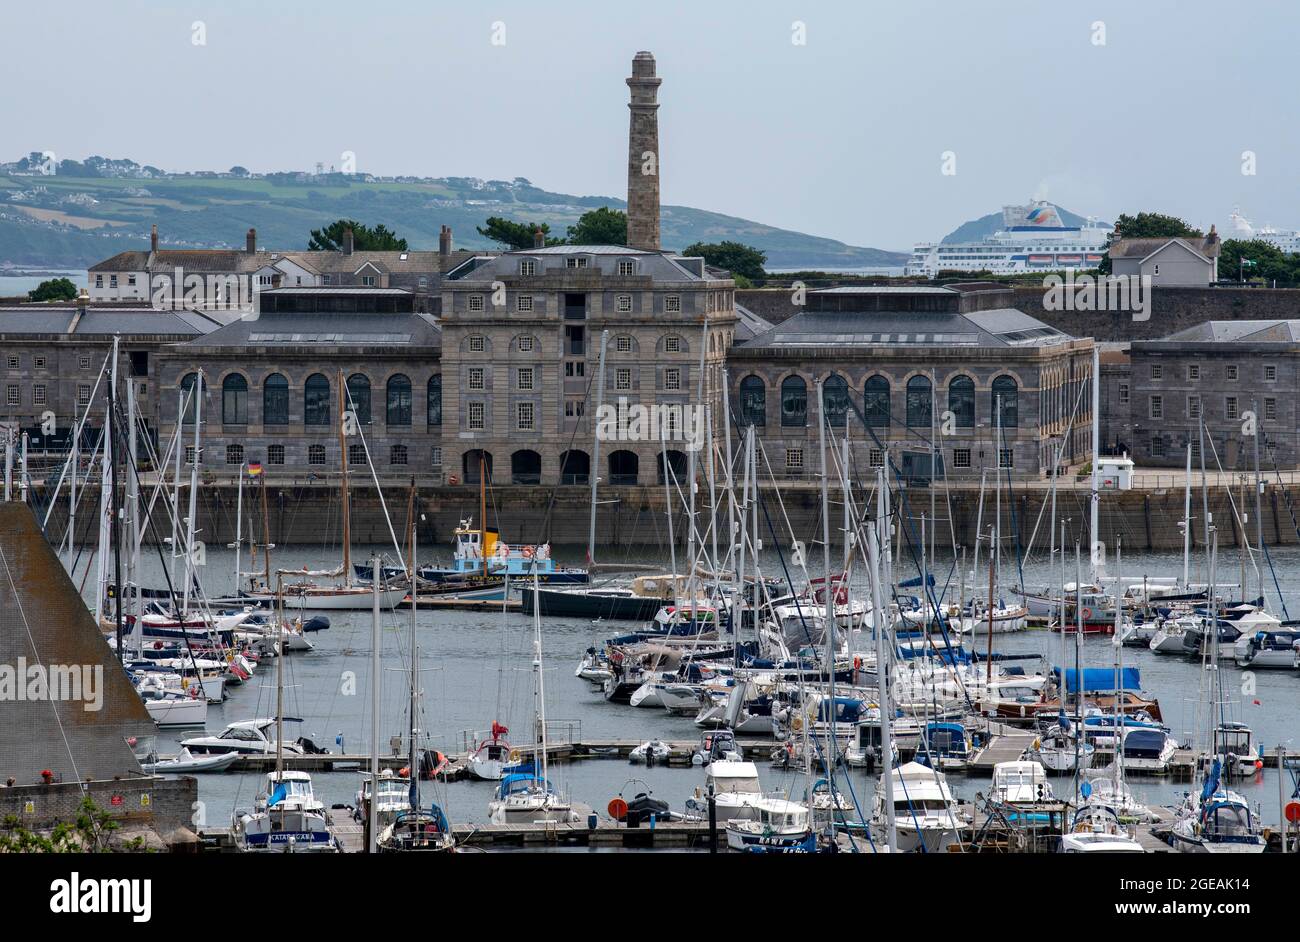 Plymouth, Devon, England, UK. 2021. The Royal William Yard a Grade 1 listed site formerly Royal Navy victualling bulidings seen from Mount Wise park, Stock Photo